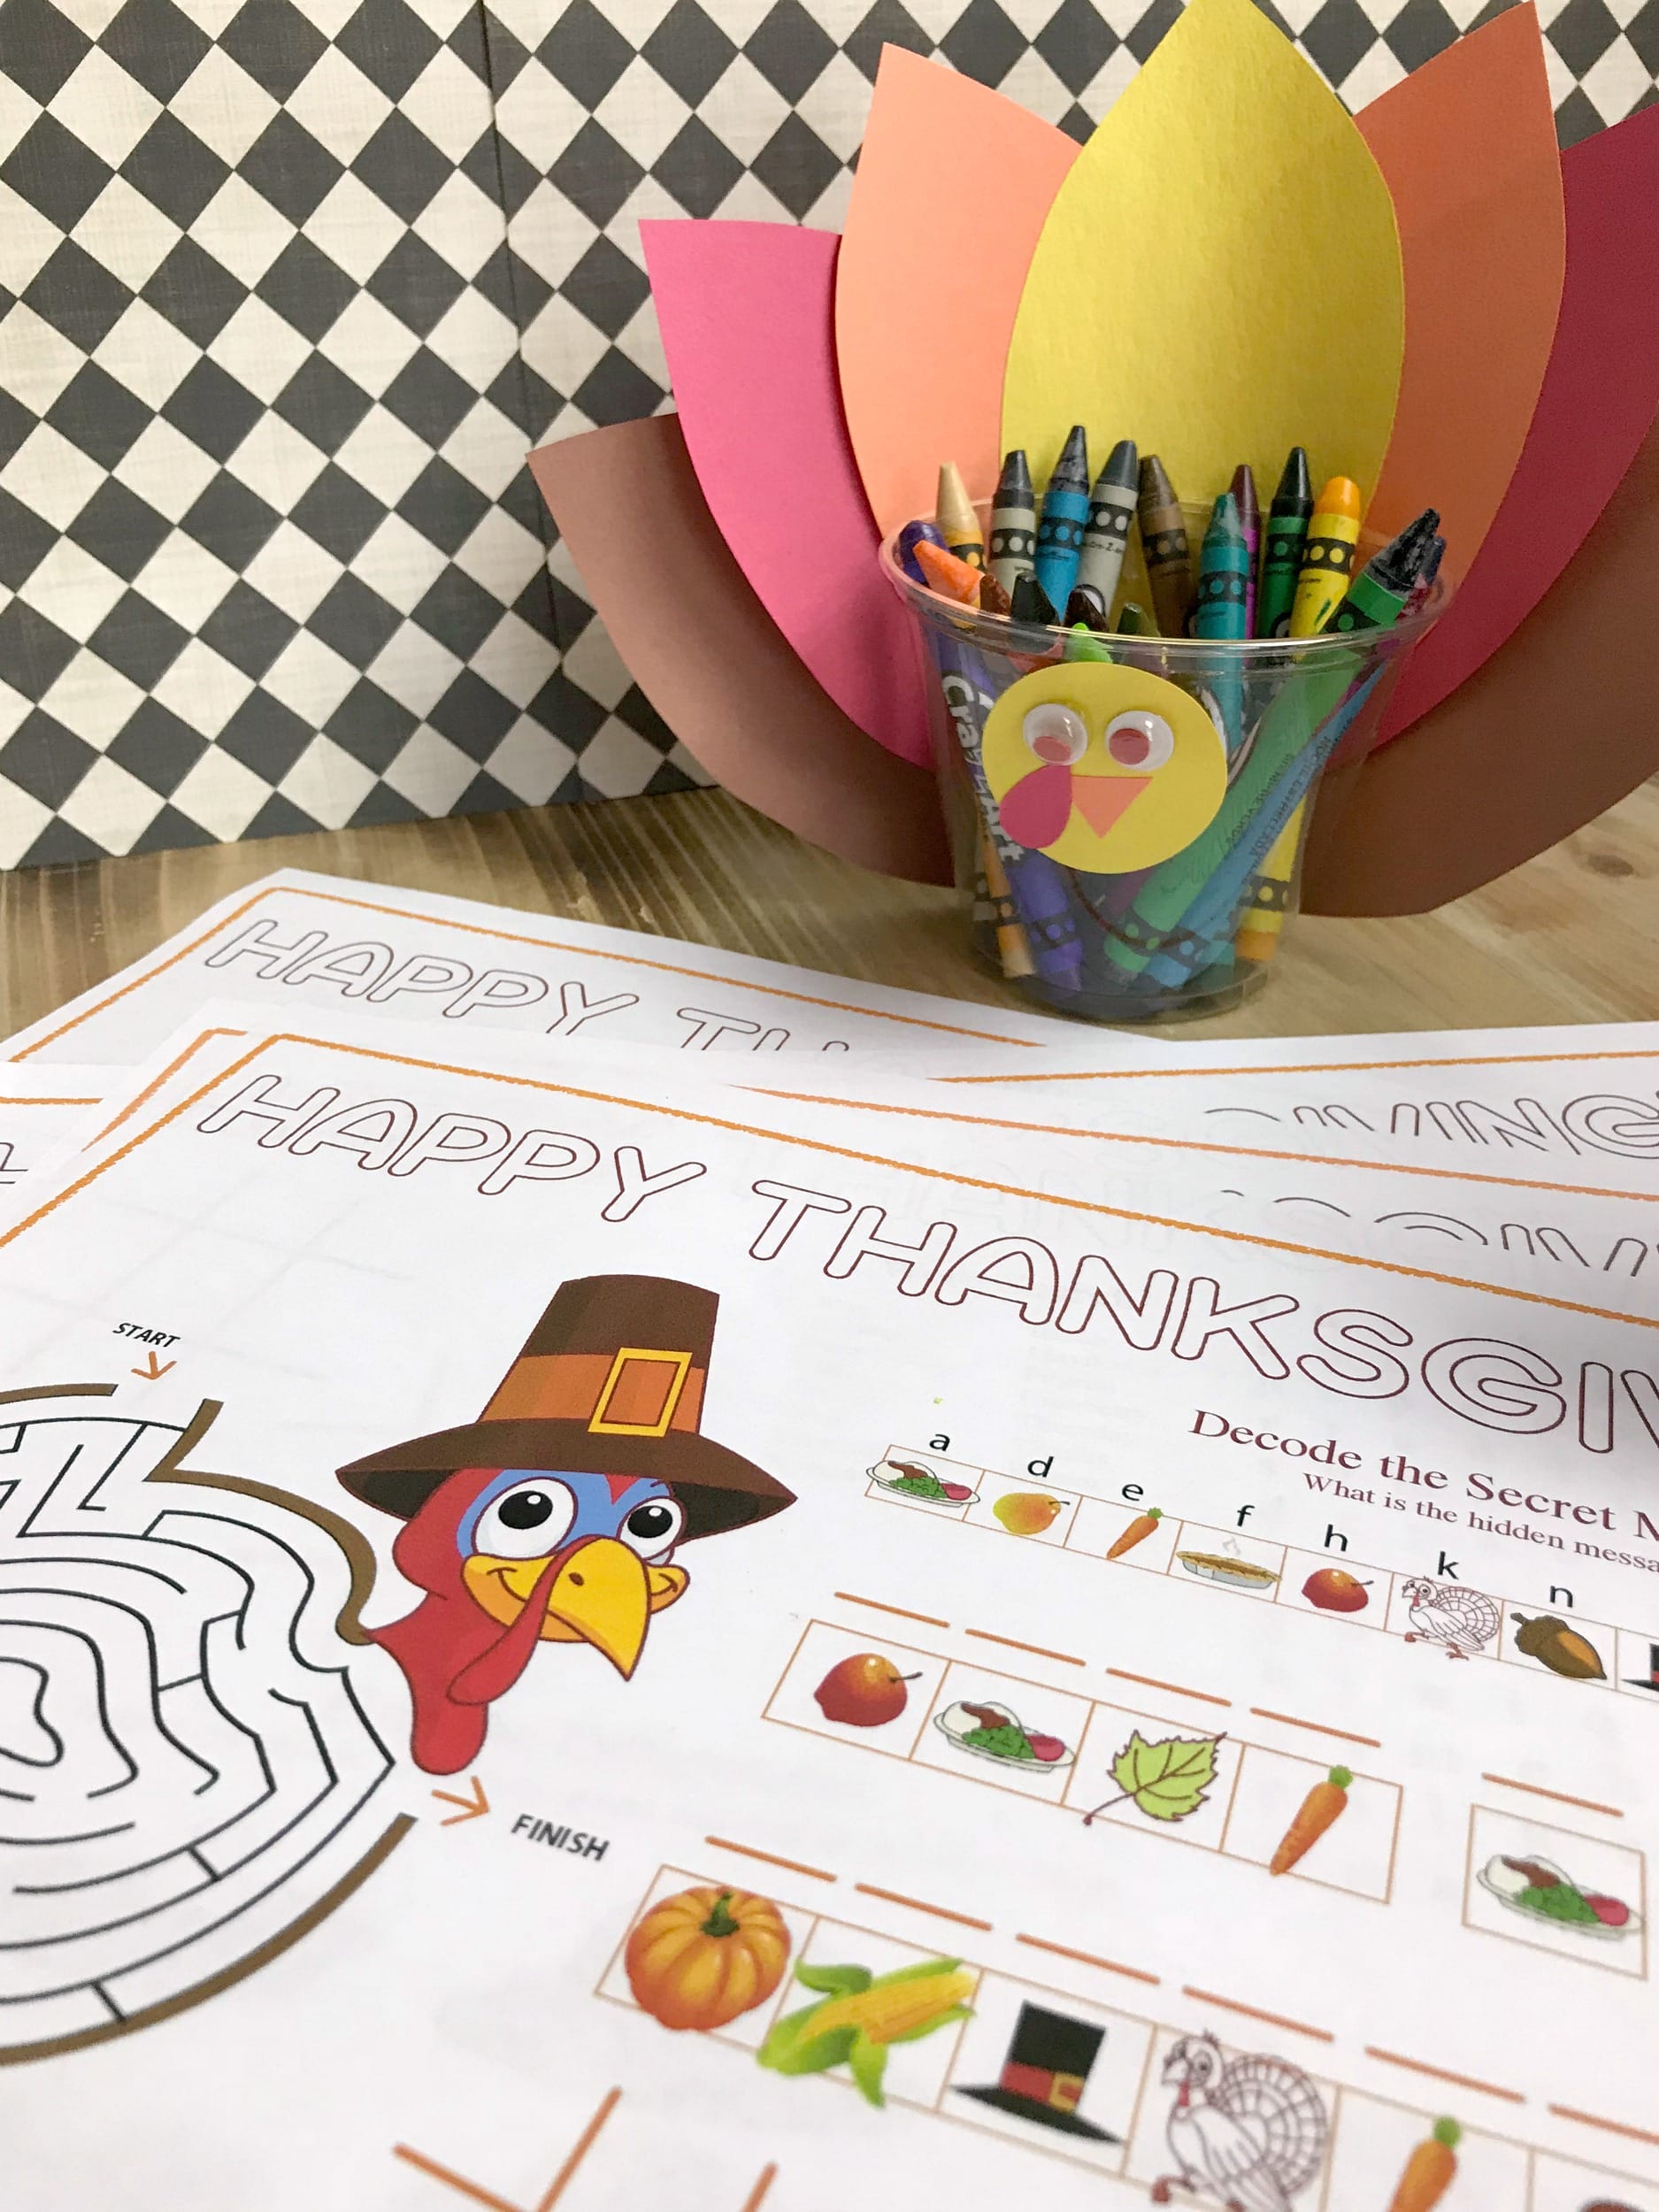 Looking for a fun Thanksgiving Day craft? Have kids make this turkey cup crayon holder and use the crayons on the printable Thanksgiving Placemat.